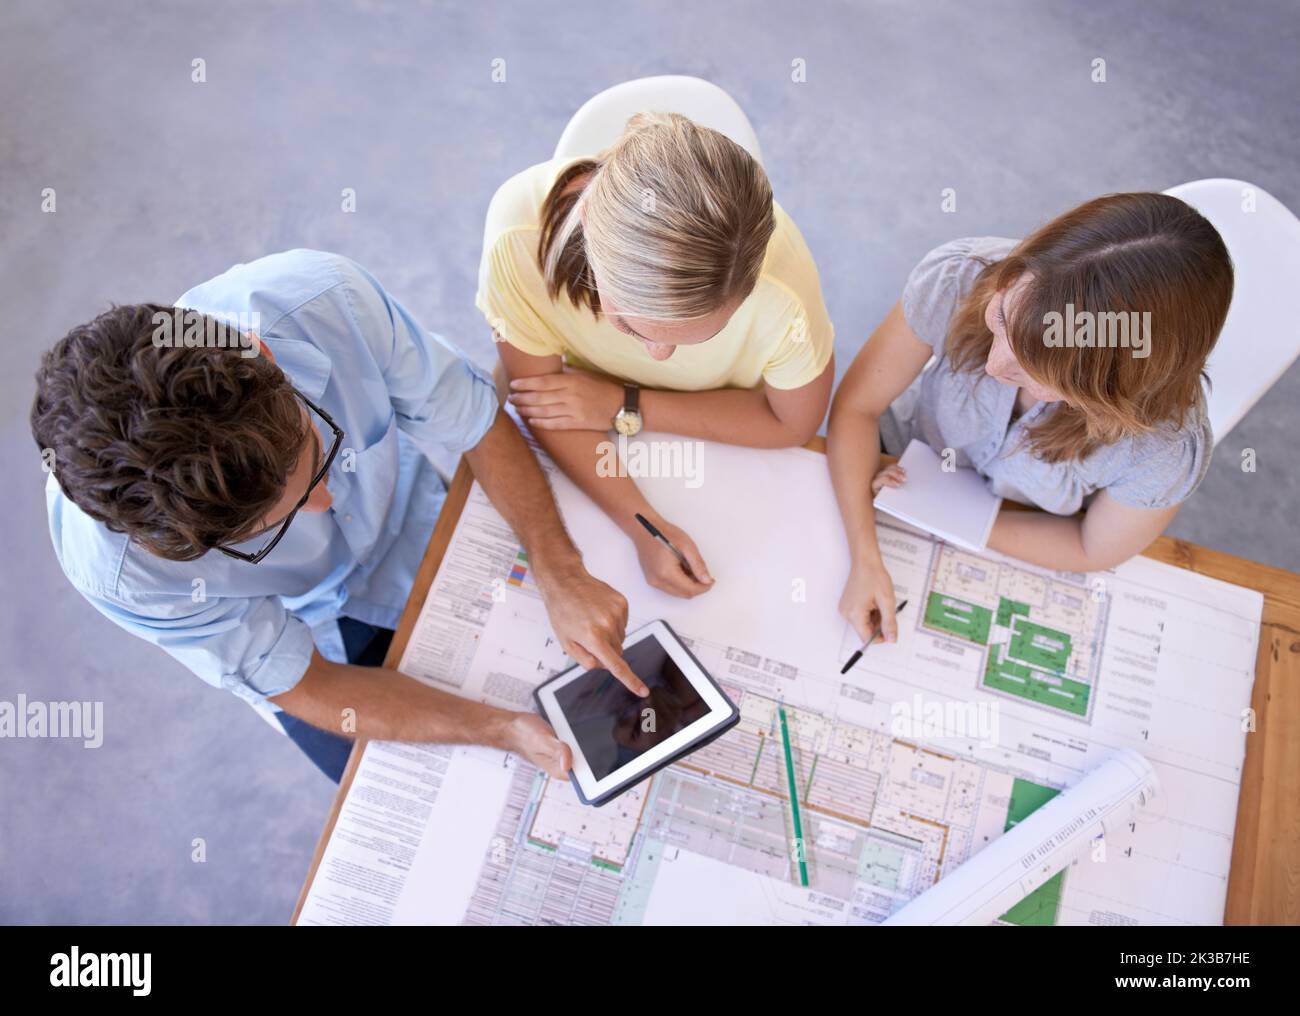 We can find inspiration online. Top view of a group of young architects using a digital tablet to do research together. Stock Photo